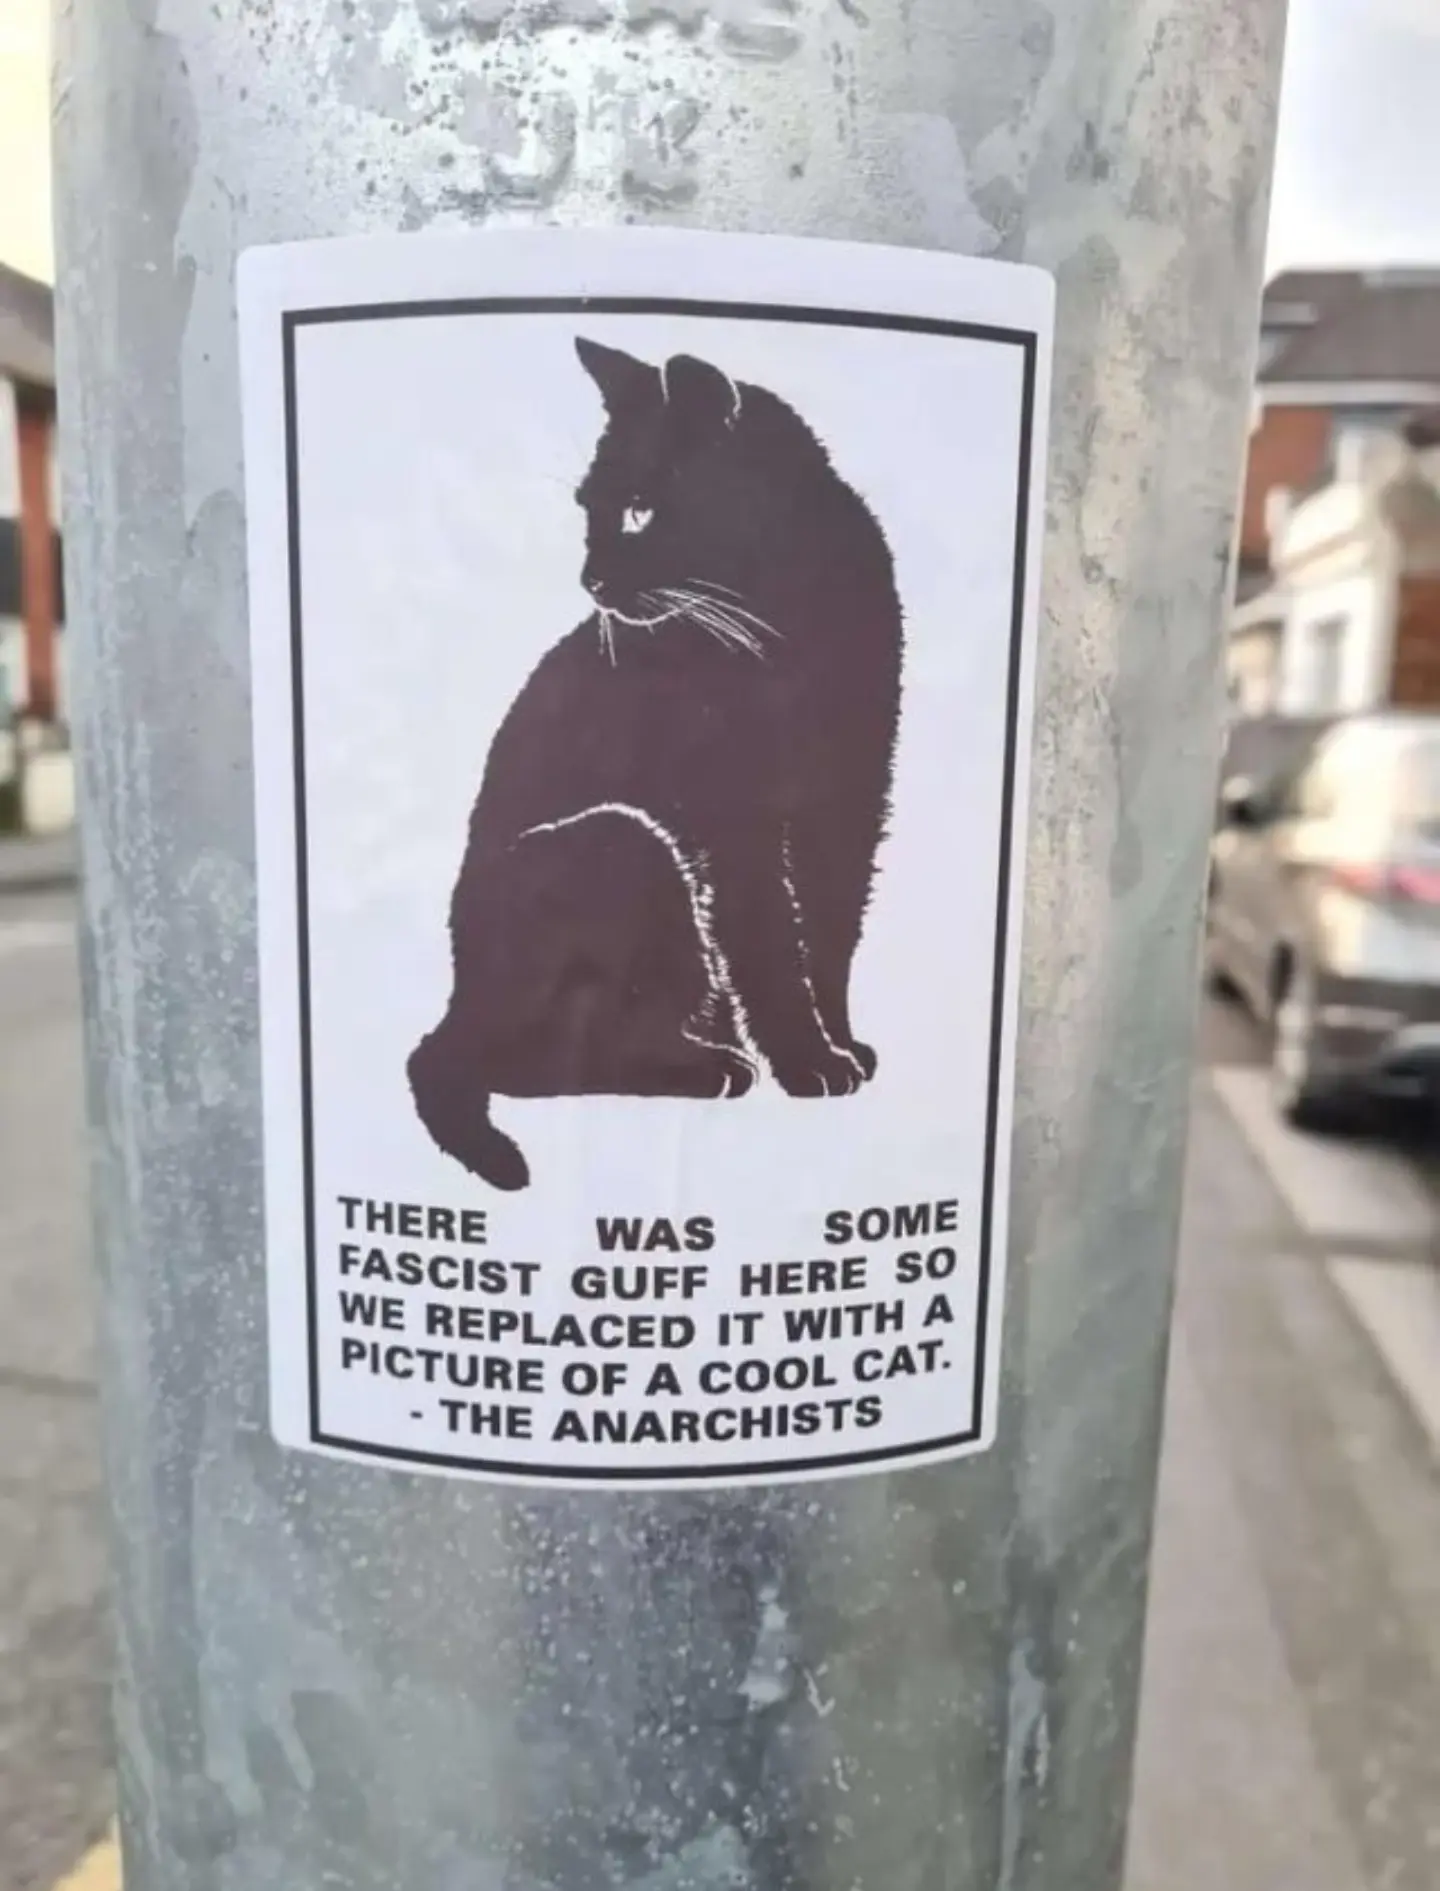 Black cat and black text on white paper wheat pasted on silver lamppost. Text is "THERE WAS SOME FASCIST GUFF HERE SO WE REPLACED IT WITH A PICTURE OF A COOL CAT. - THE ANARCHISTS"